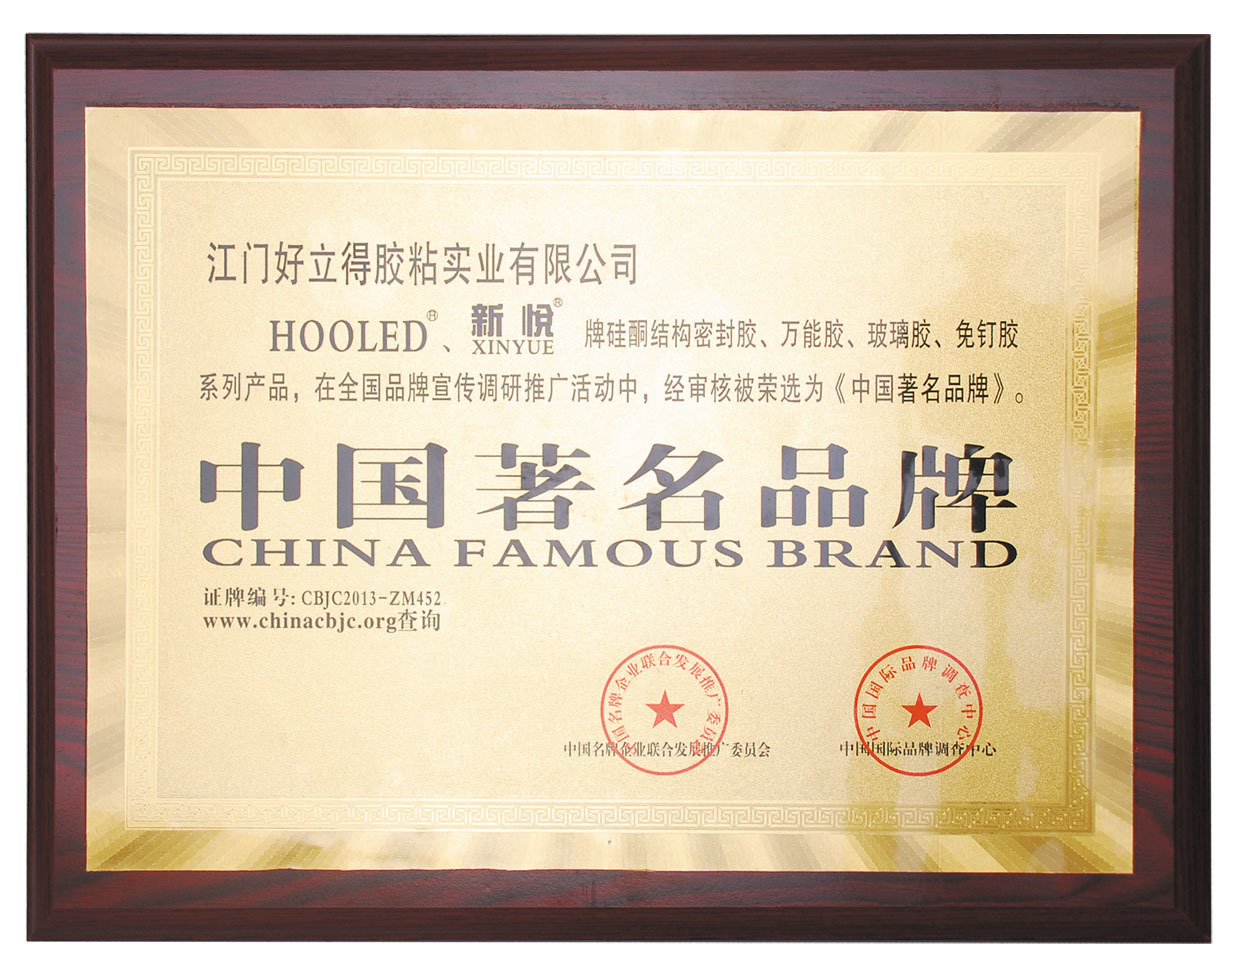 Jiangmen Haolide Adhesive Industry Co., Ltd. has passed the ISO9001: 2008 international quality management system certification. Won the title of 